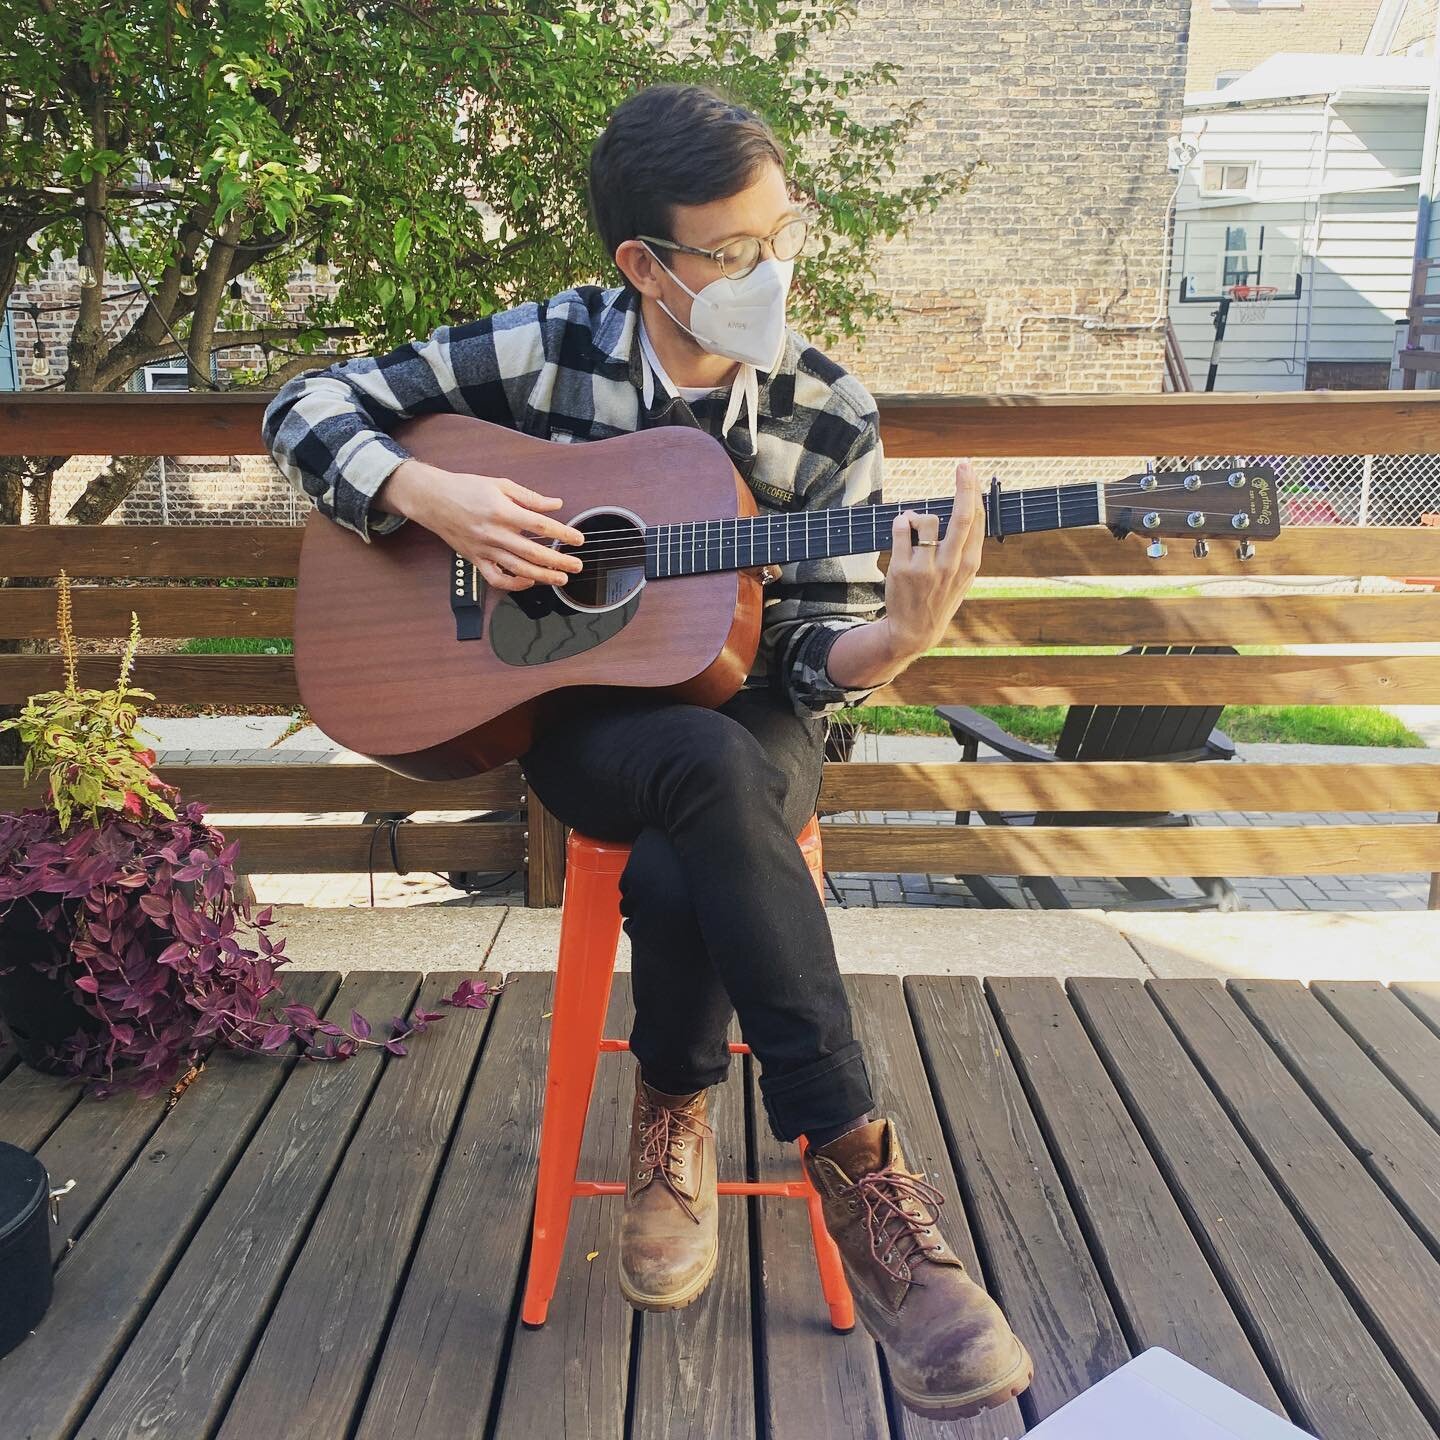 friendship(new songs + familiar sounds) - covid woes =  one life-giving backyard rehearsal 🌞 #musicmath